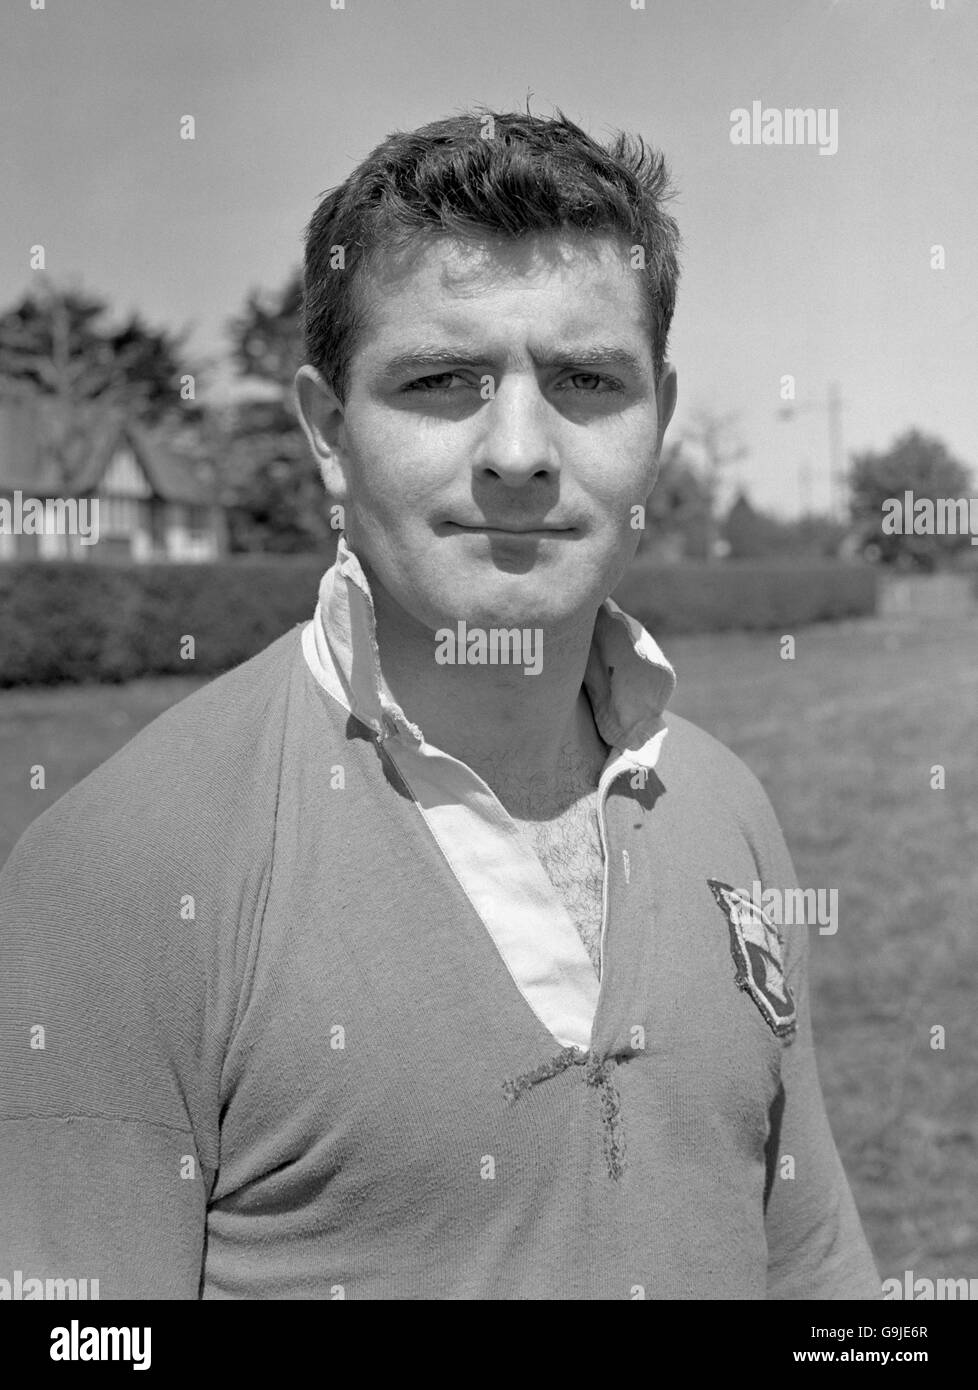 Eastbourne rfc Black and White Stock Photos & Images - Alamy